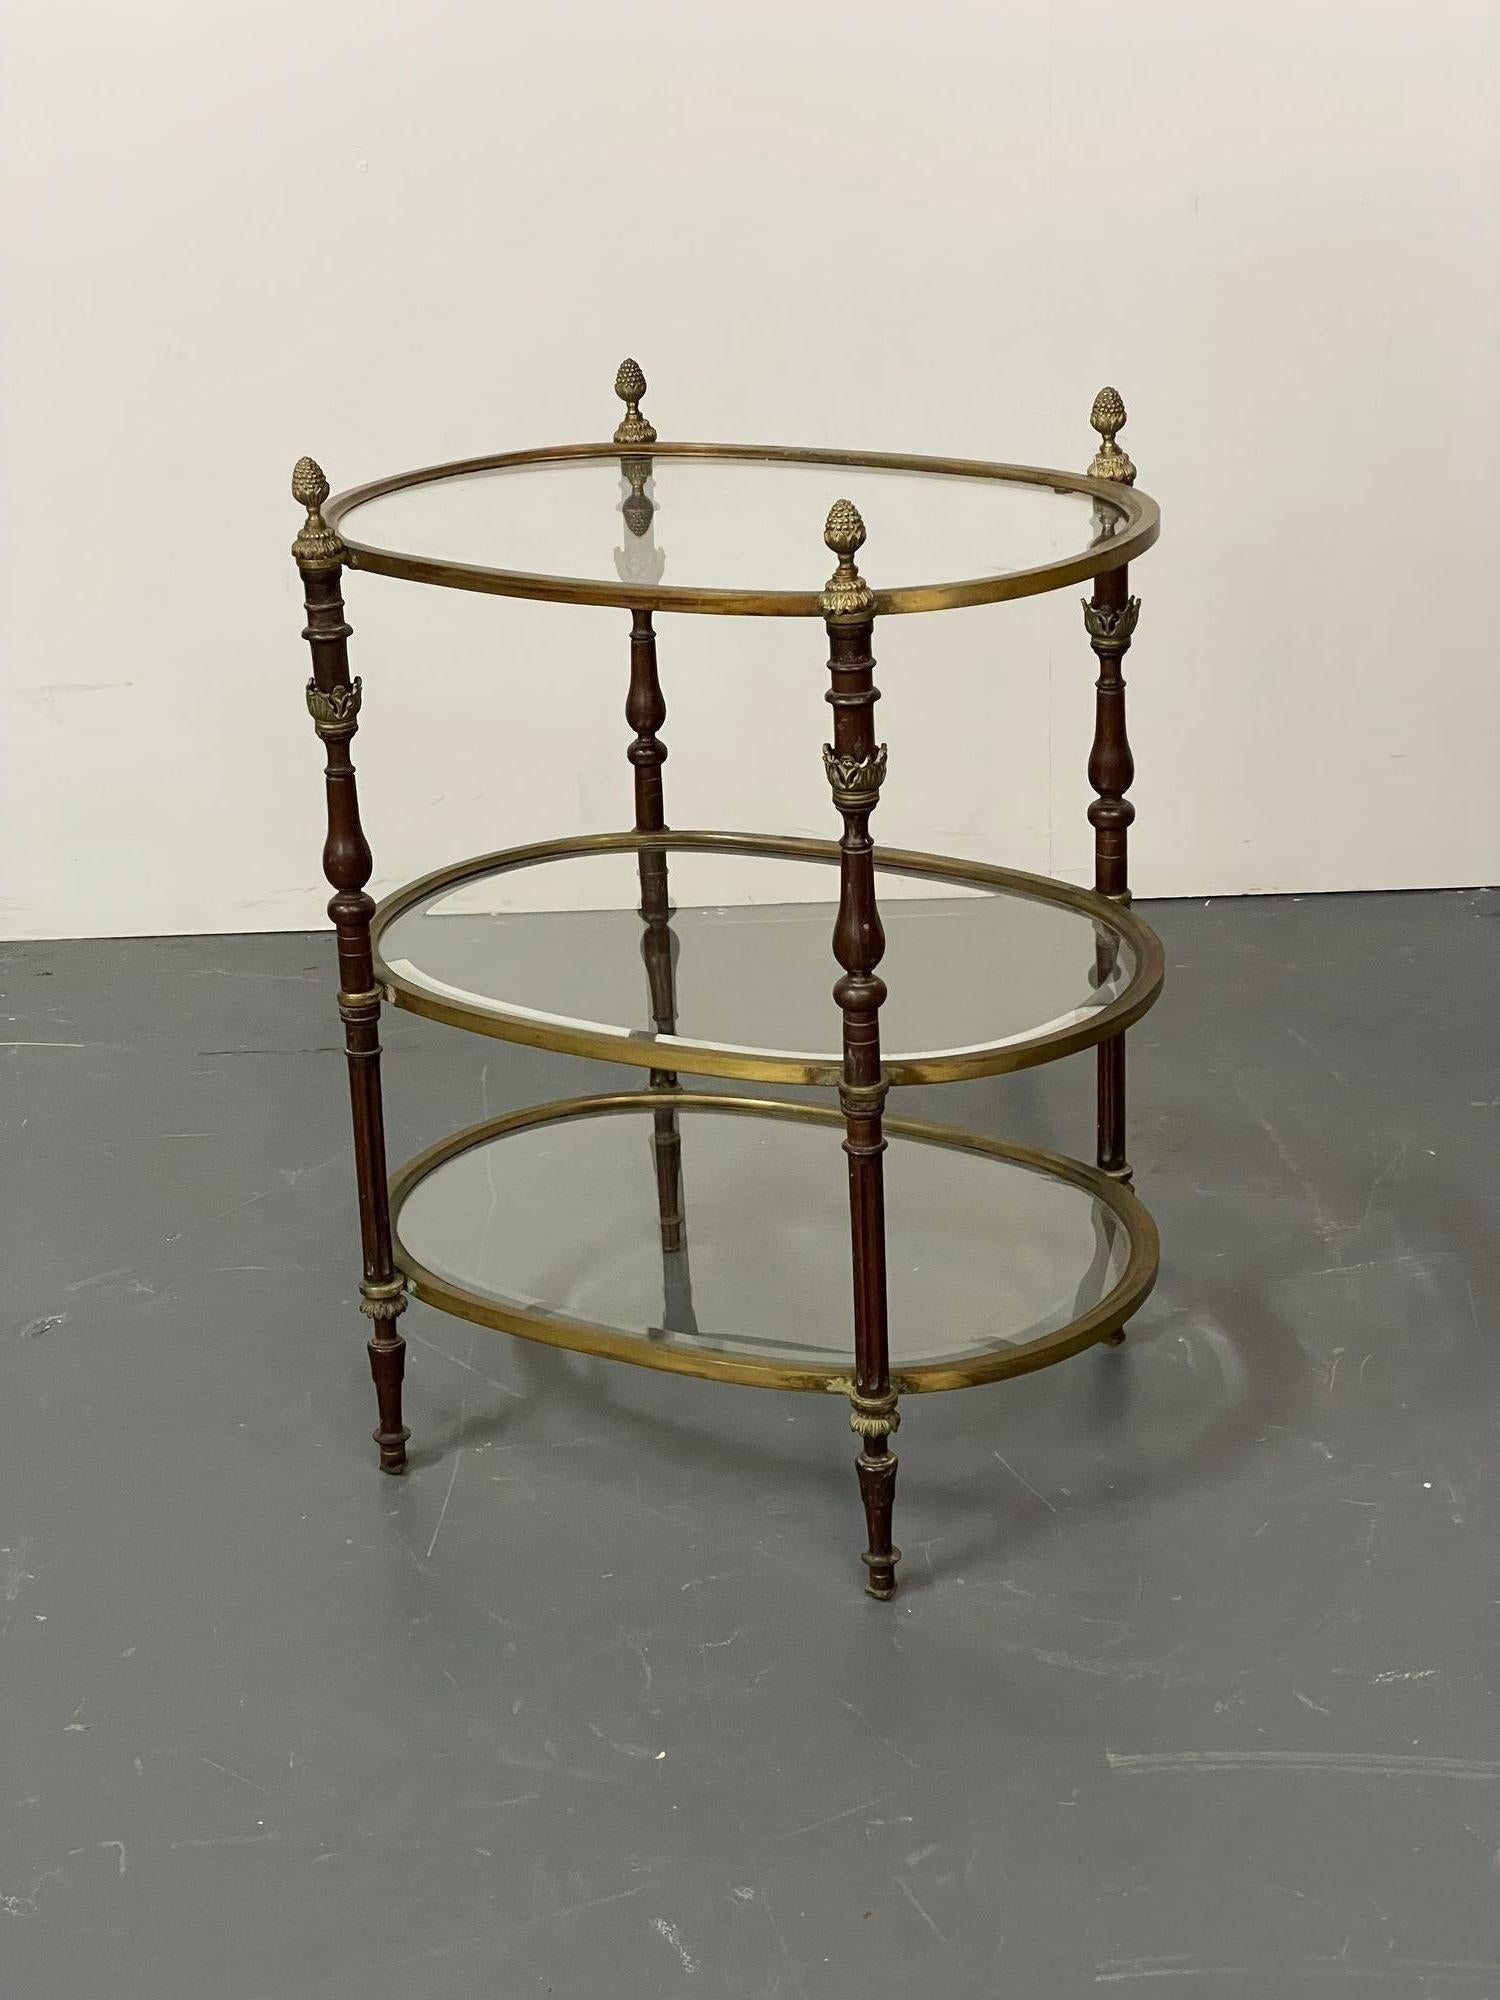 French Baques style three tier Etagere, server
A bronze 1920s diminutive server or etagere having three glass shelves cased in a bronze apron supported by finely cast bronze column form sides terminating in acorn finials. Nice think strong bronze